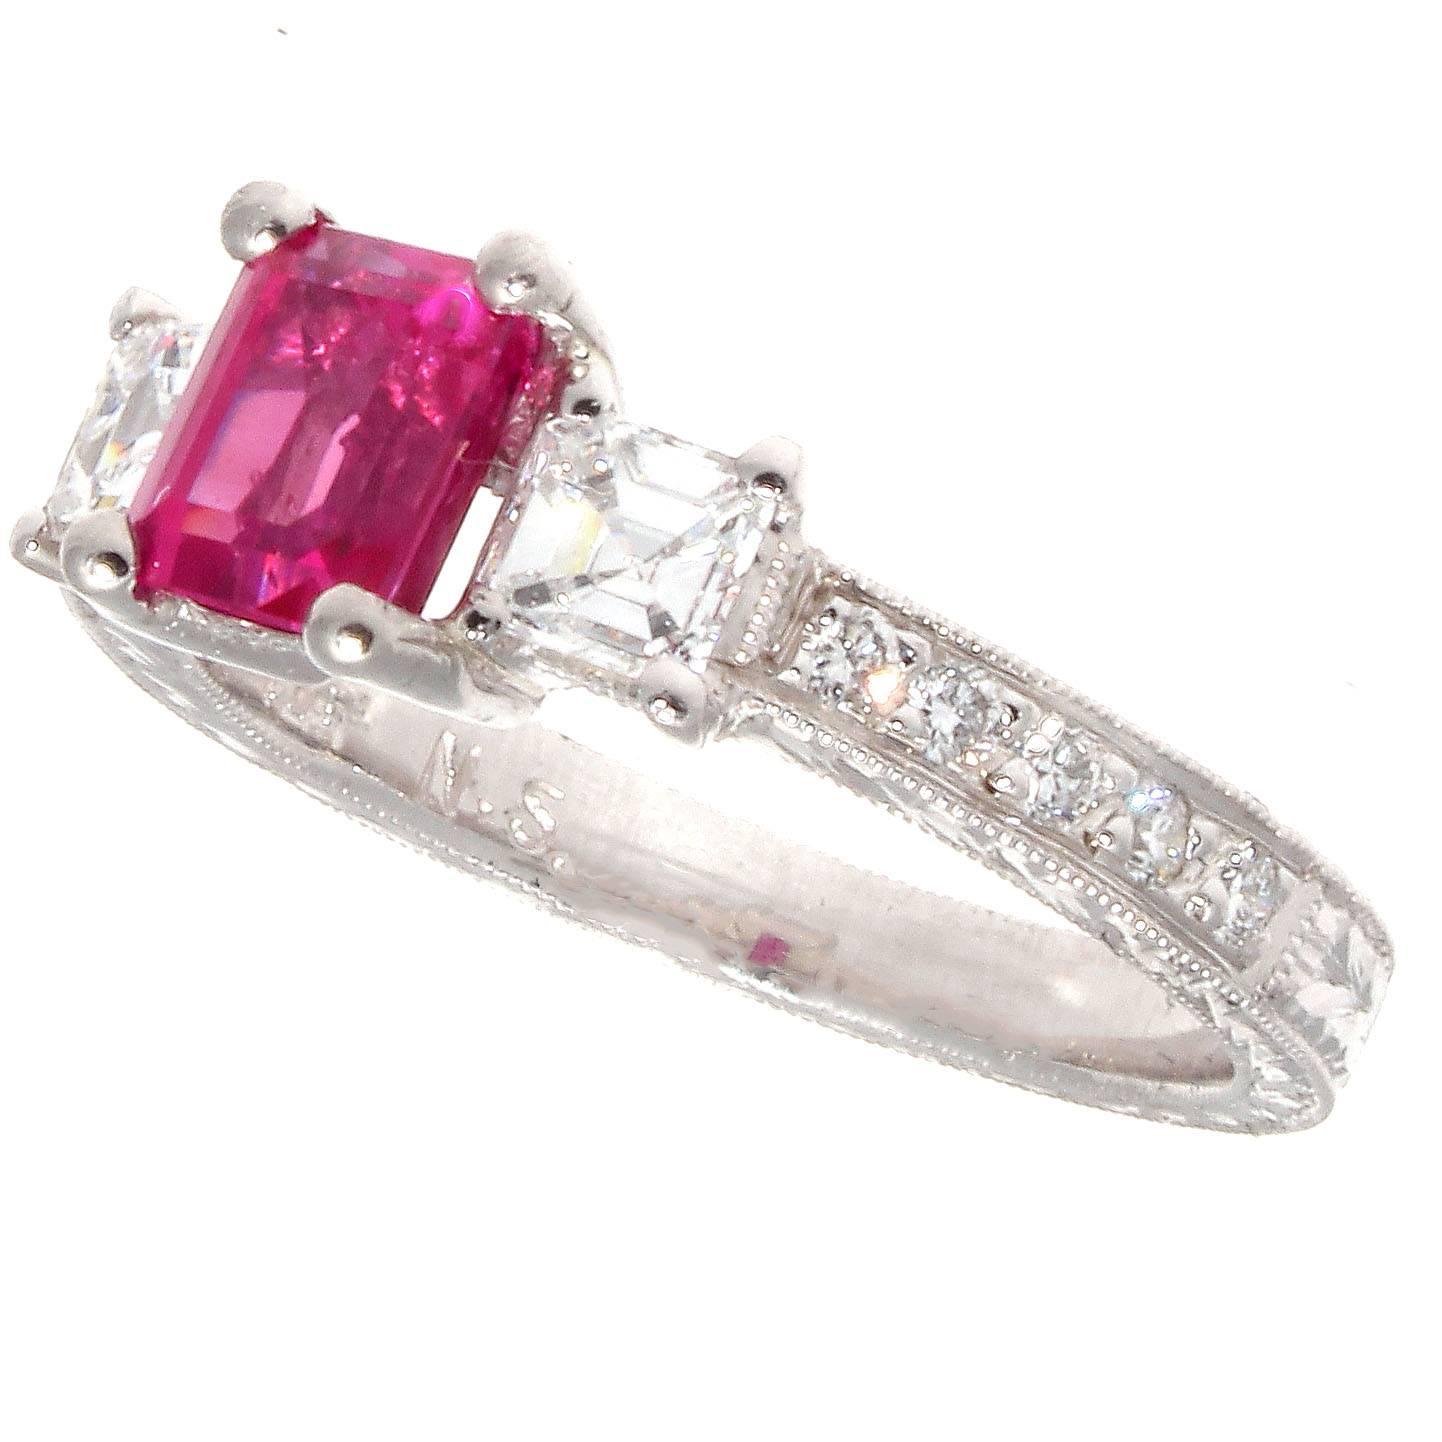 Subject to a color that is hardly ever replicated. Featuring a vibrant pink sapphire that weighs 1.20 carats accented by colorless diamonds. Crafted in platinum.